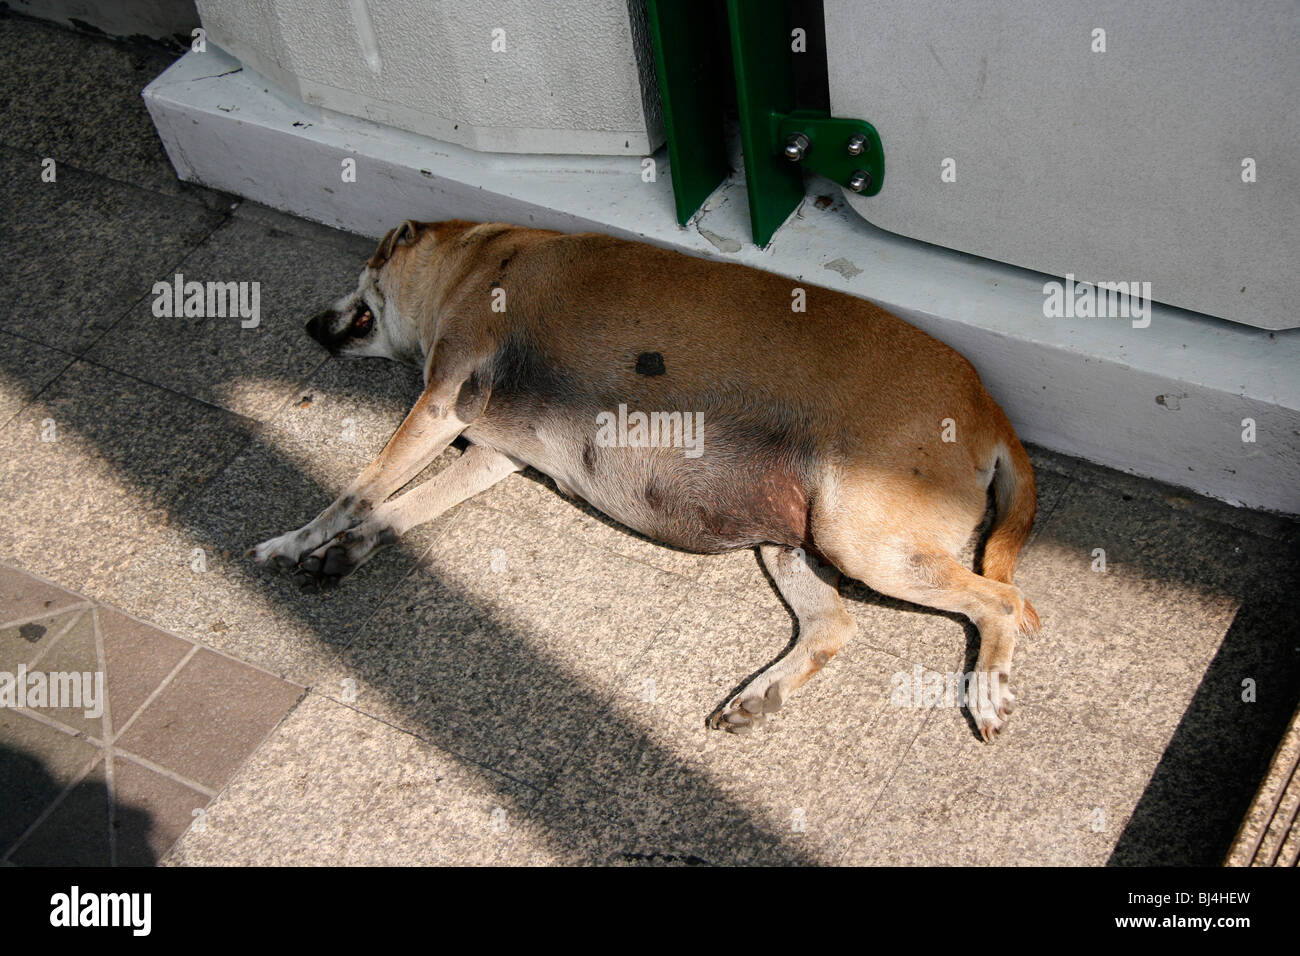 Mangy looking overweight sleeping dog Stock Photo